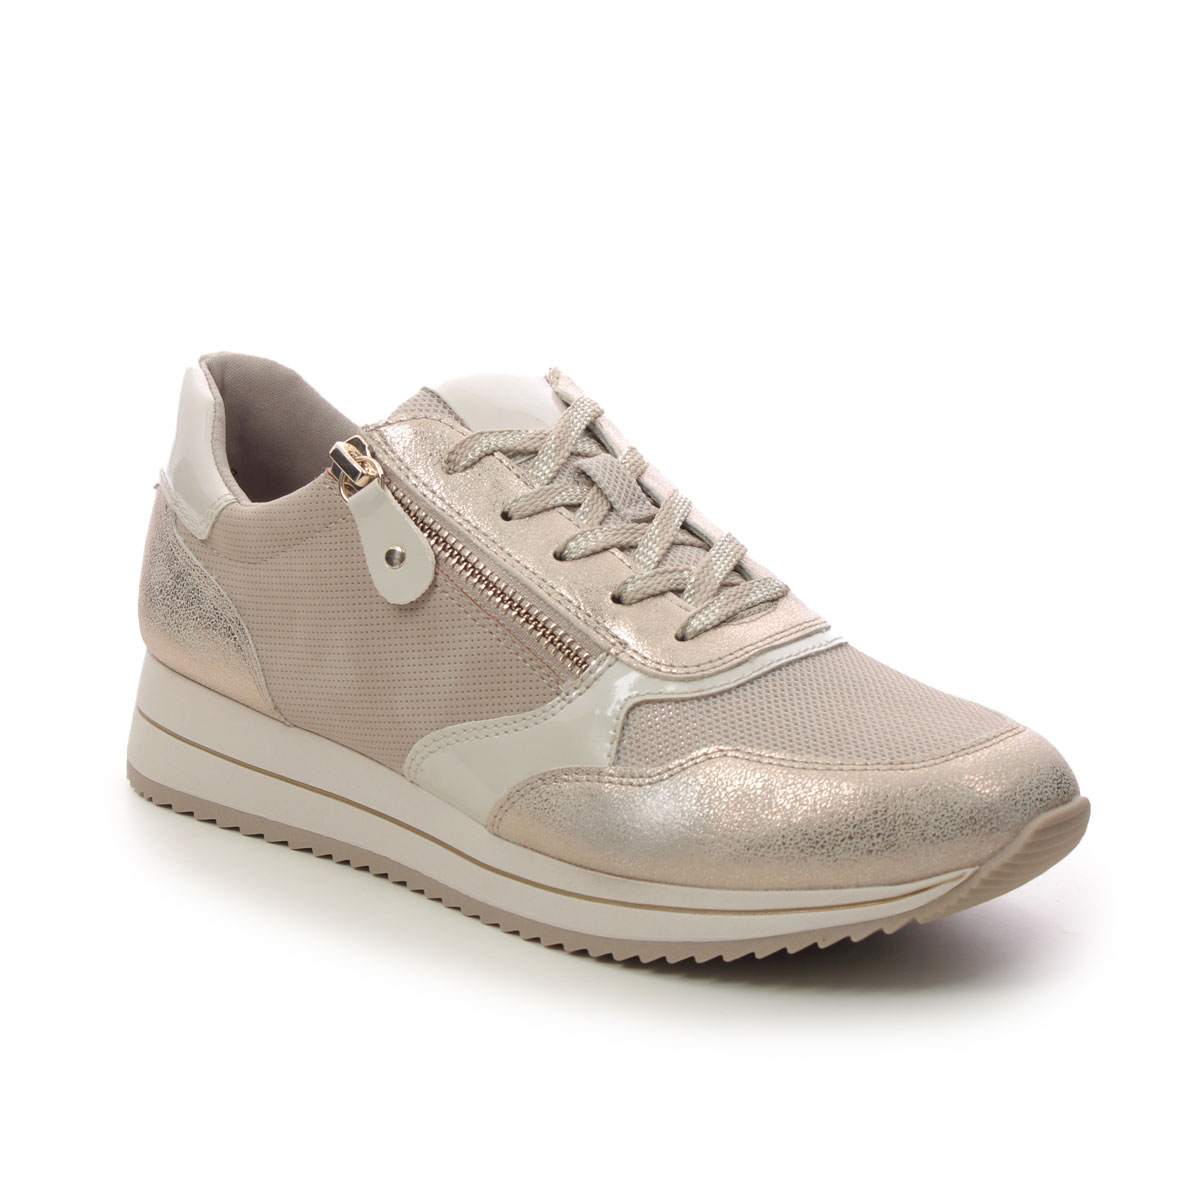 Jana Lulea Wide Gold Womens trainers 23763-42-499 in a Plain Man-made in Size 39